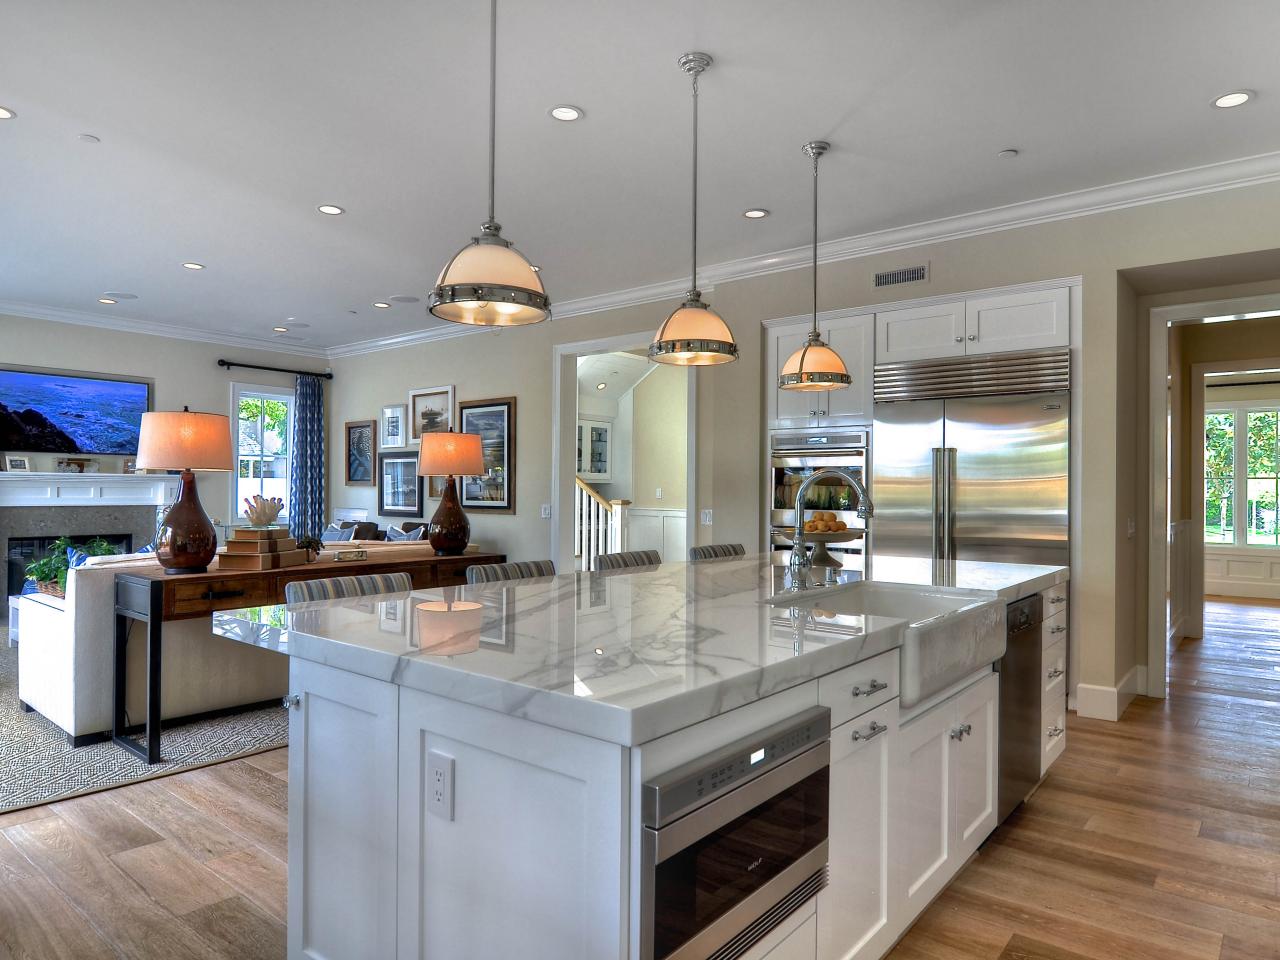 kitchen open room concept hgtv traditional living modern island kitchens kevin smith designs bright light pendant family rooms layout provided